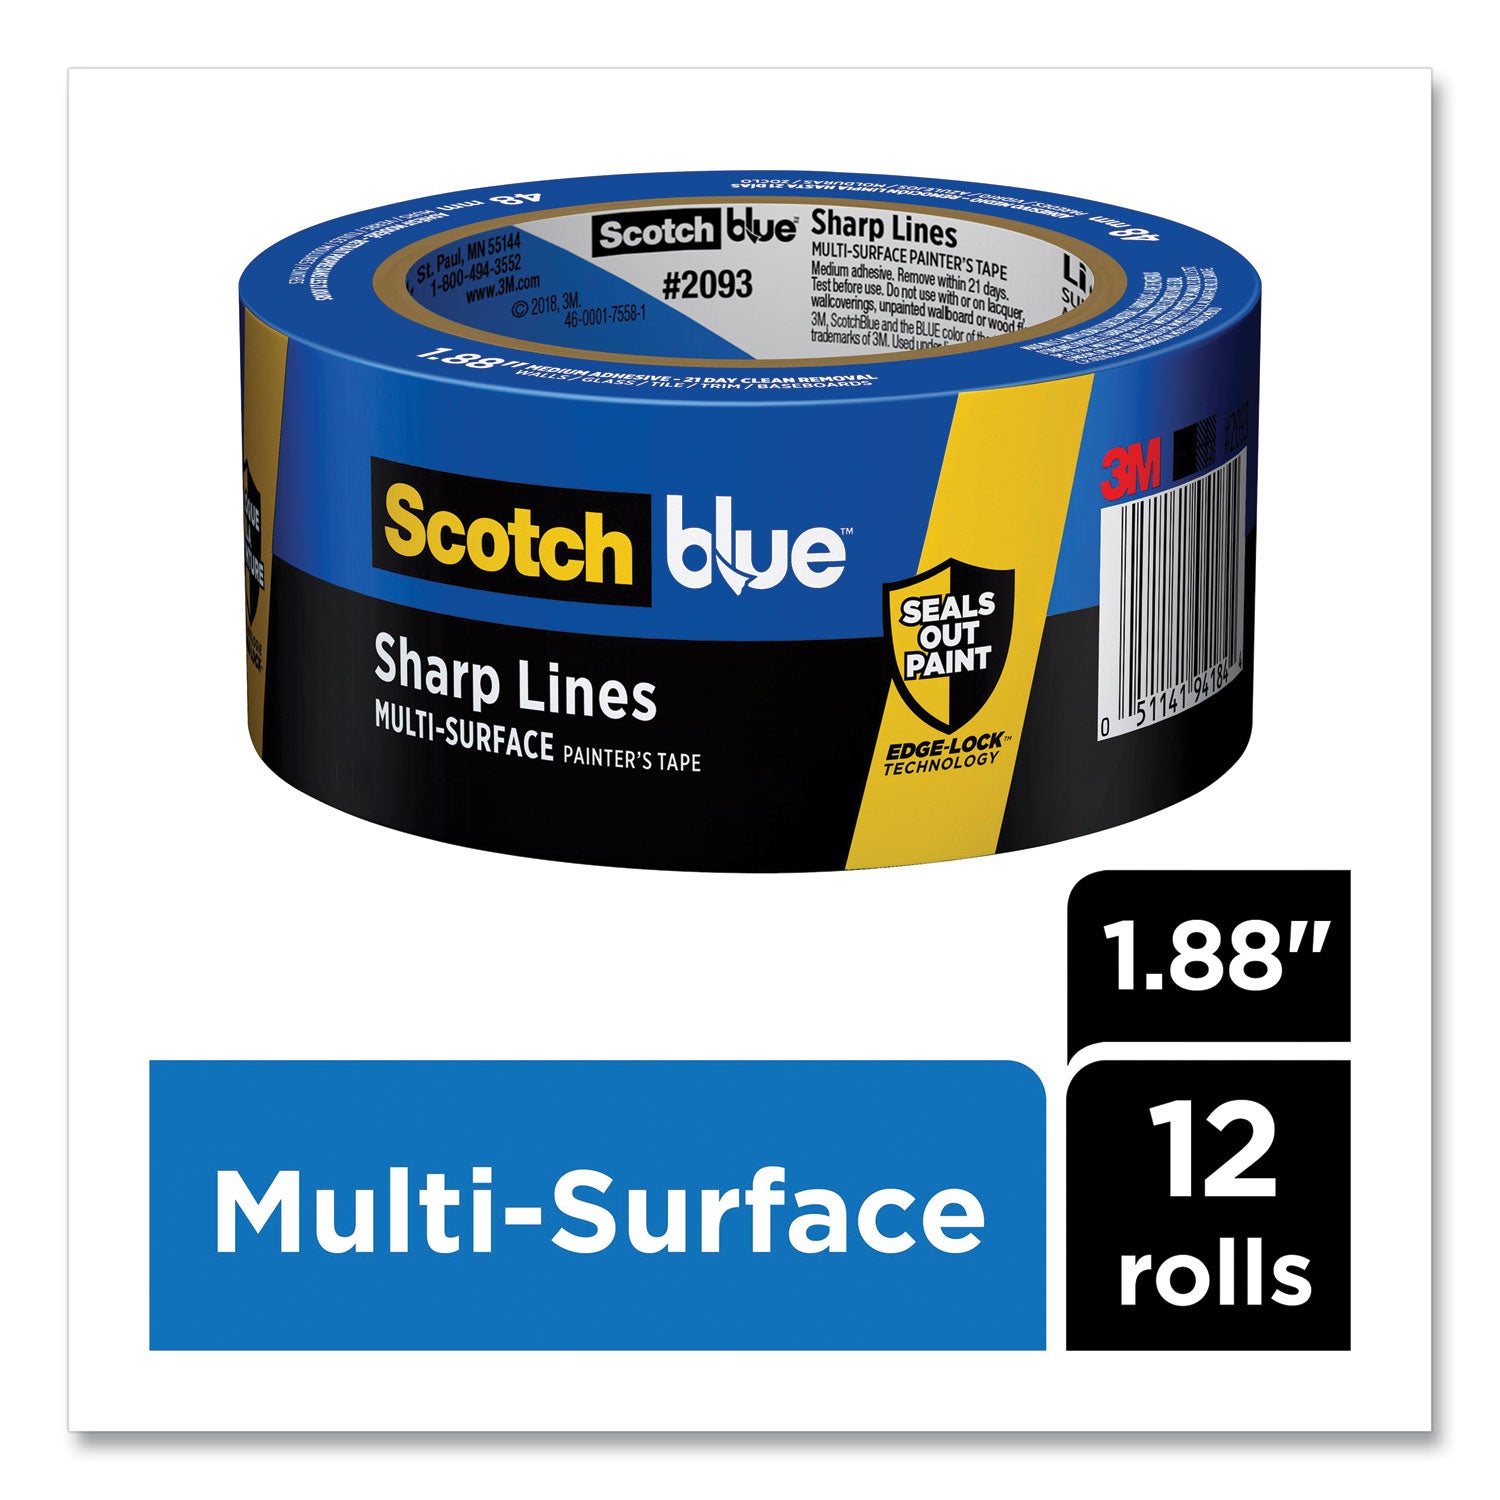 sharp-lines-multi-surface-painters-tape-3-core-188-x-60-yds-blue_mmm70006576063 - 2